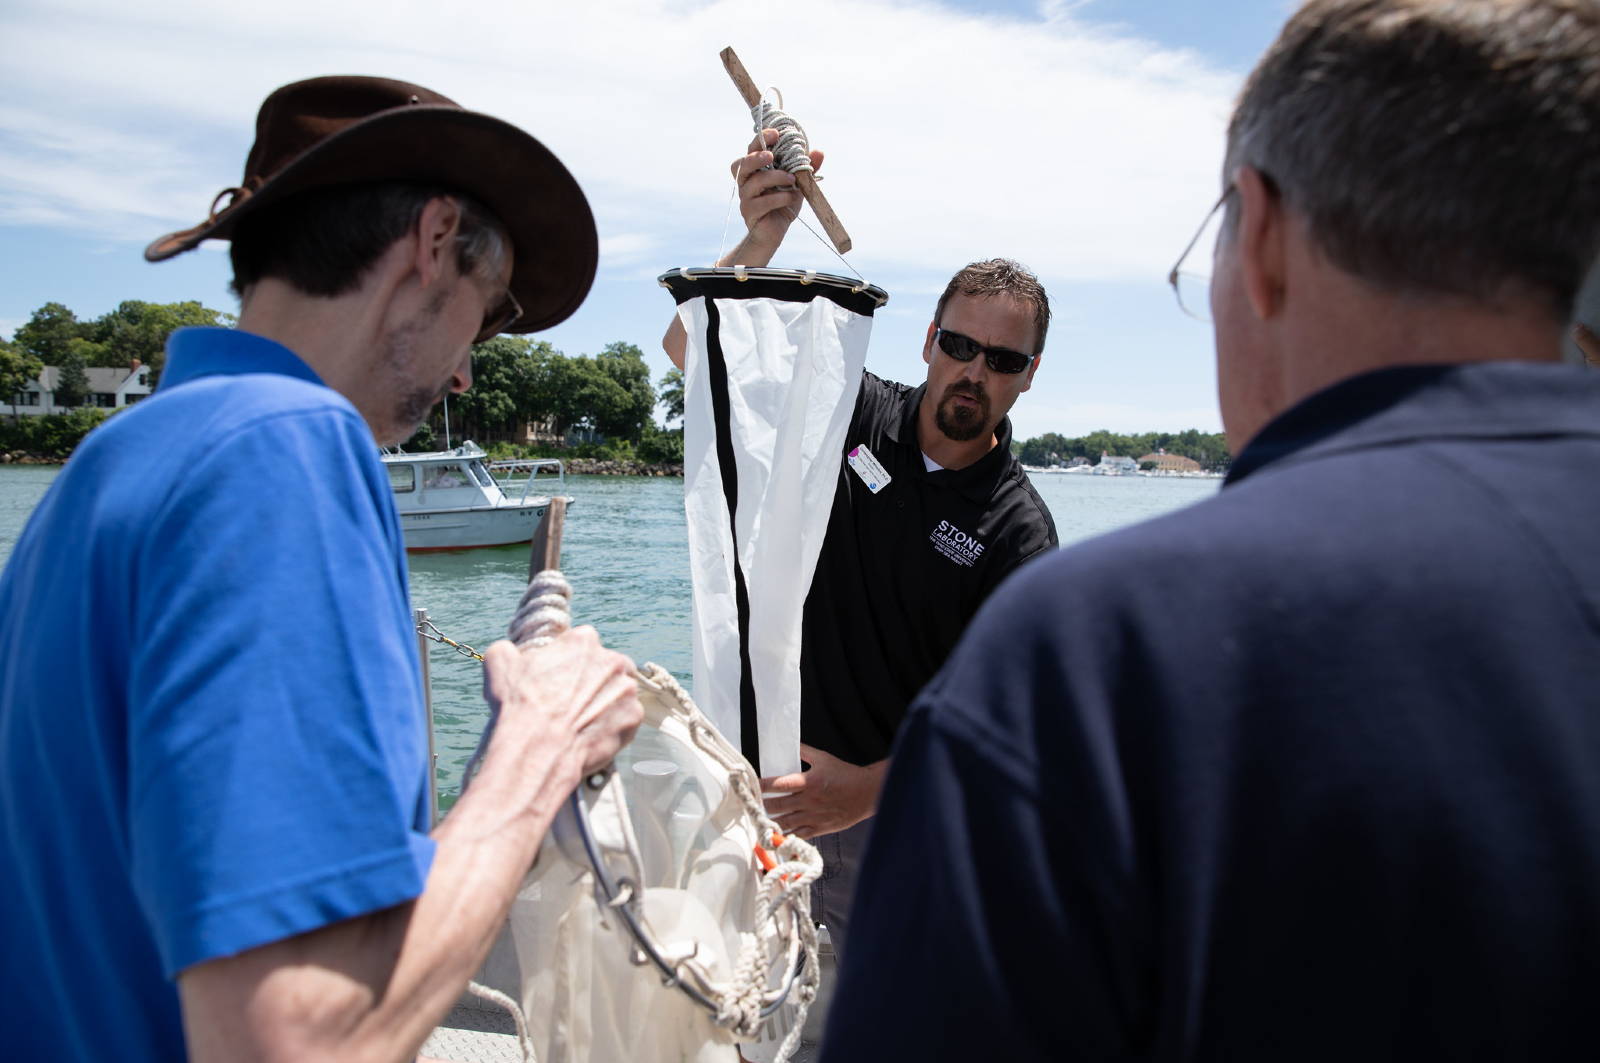 Chris Winslow preparing a zooplankton net for a tow